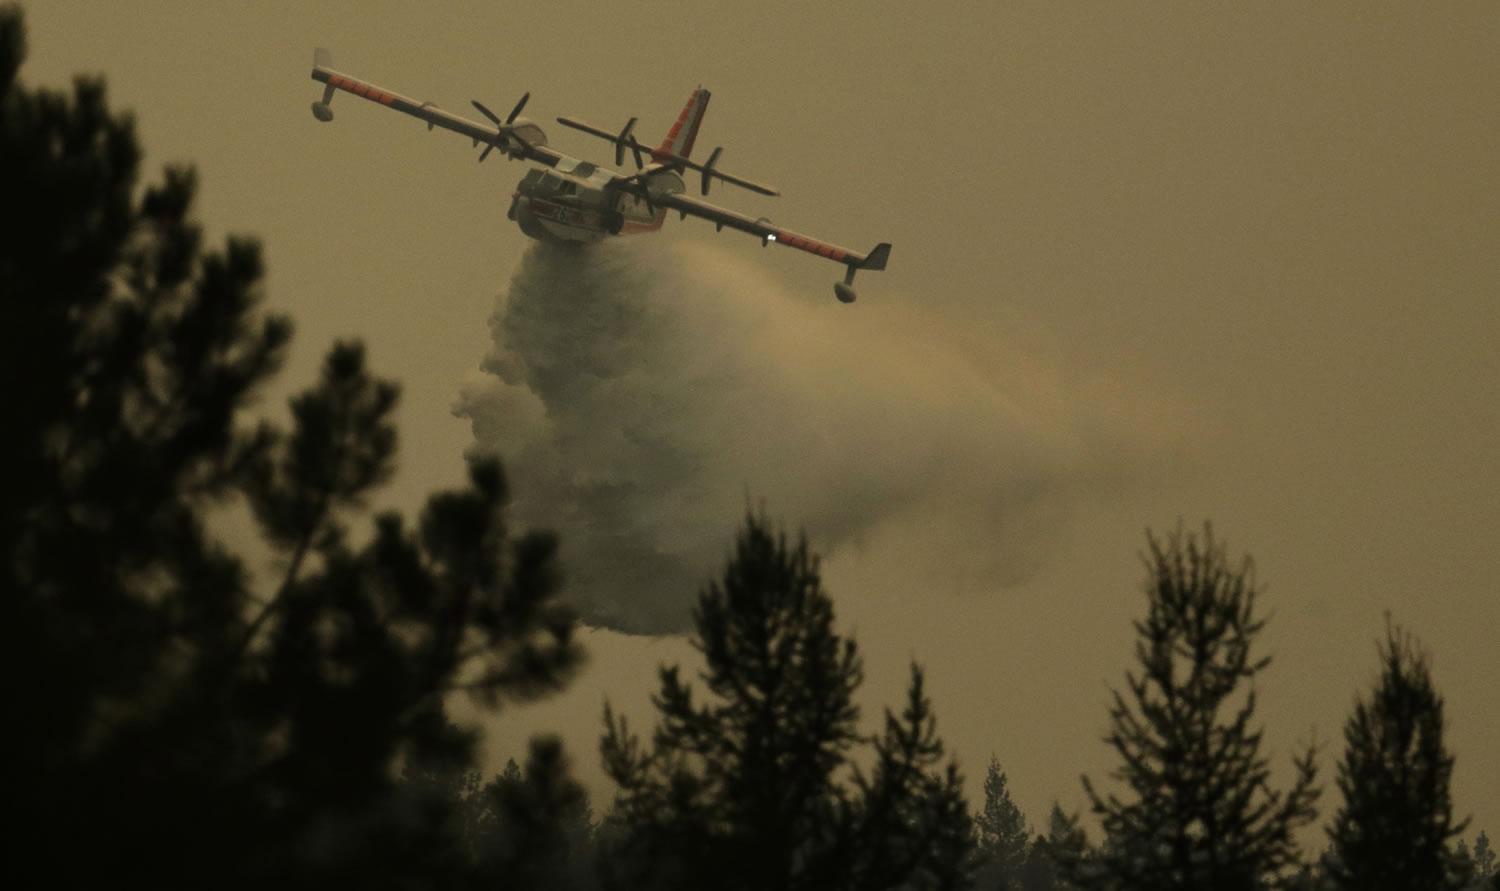 An airplane flies through smoky air as it drops water on a wildfire that flared up in the late afternoon near Omak, Wash., Thursday, Aug. 27, 2015. (AP Photo/Ted S.